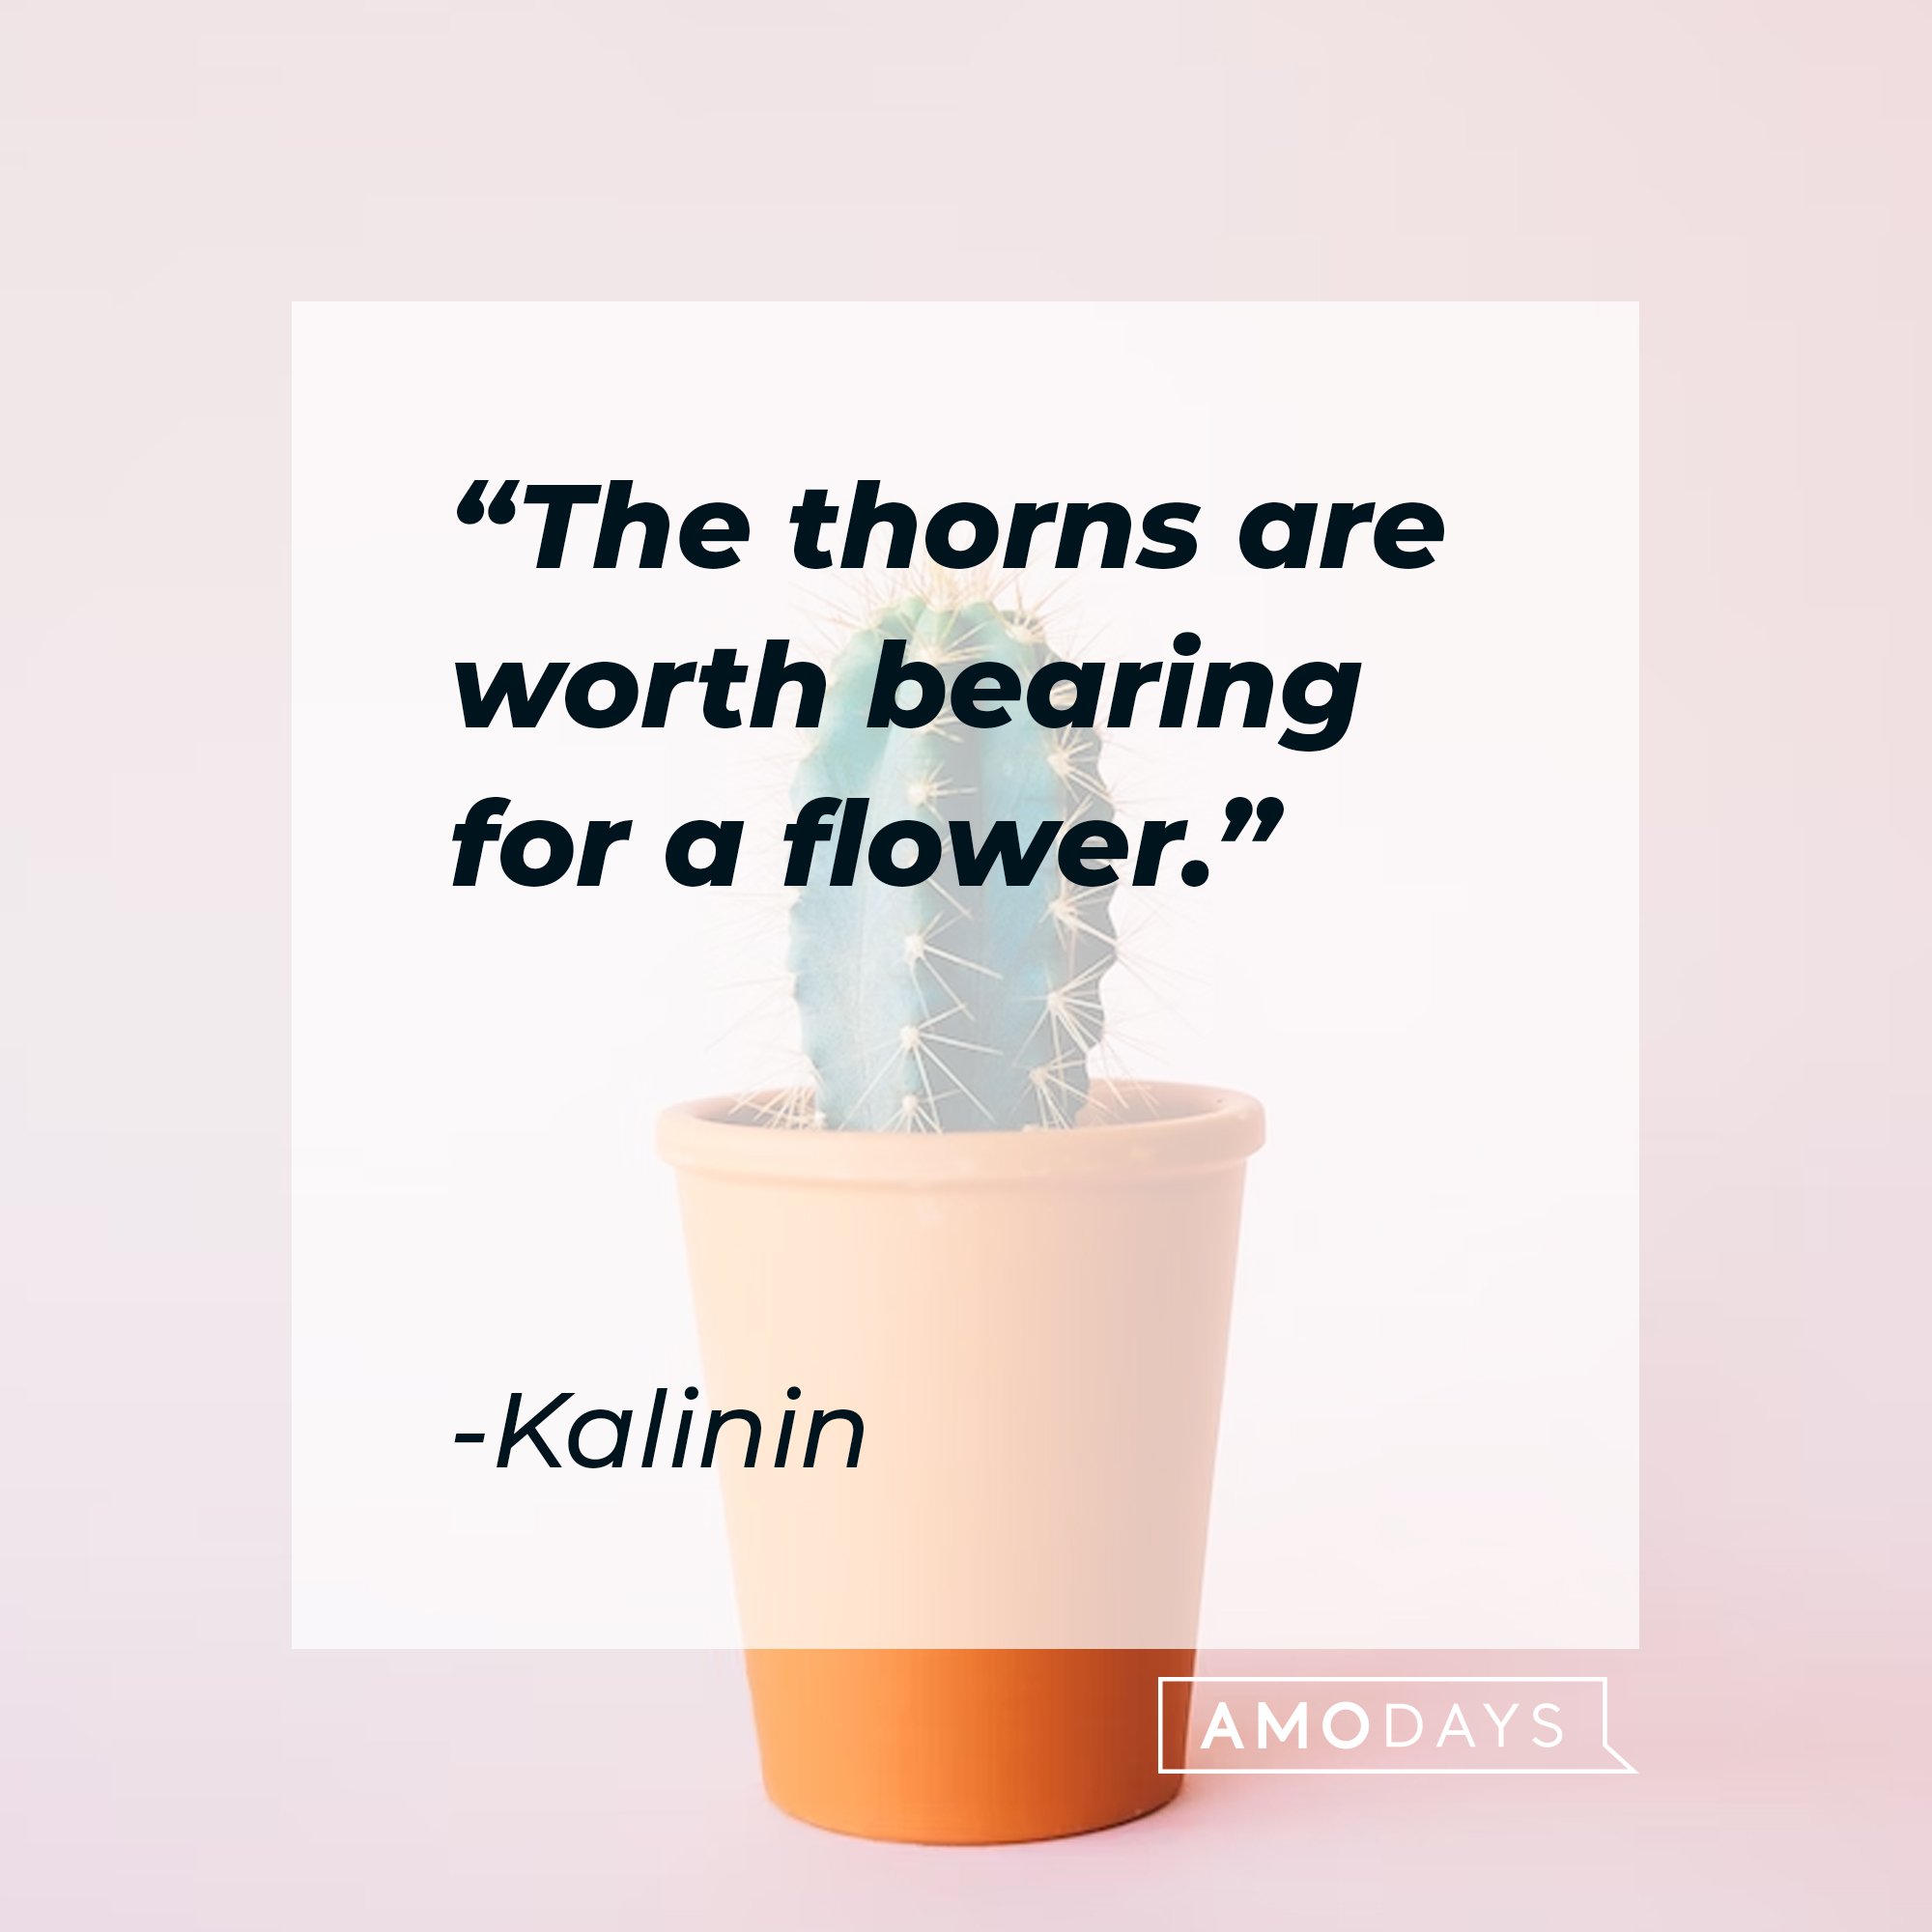  Kalinin’s quote: “The thorns are worth bearing for a flower." | Image: AmoDays